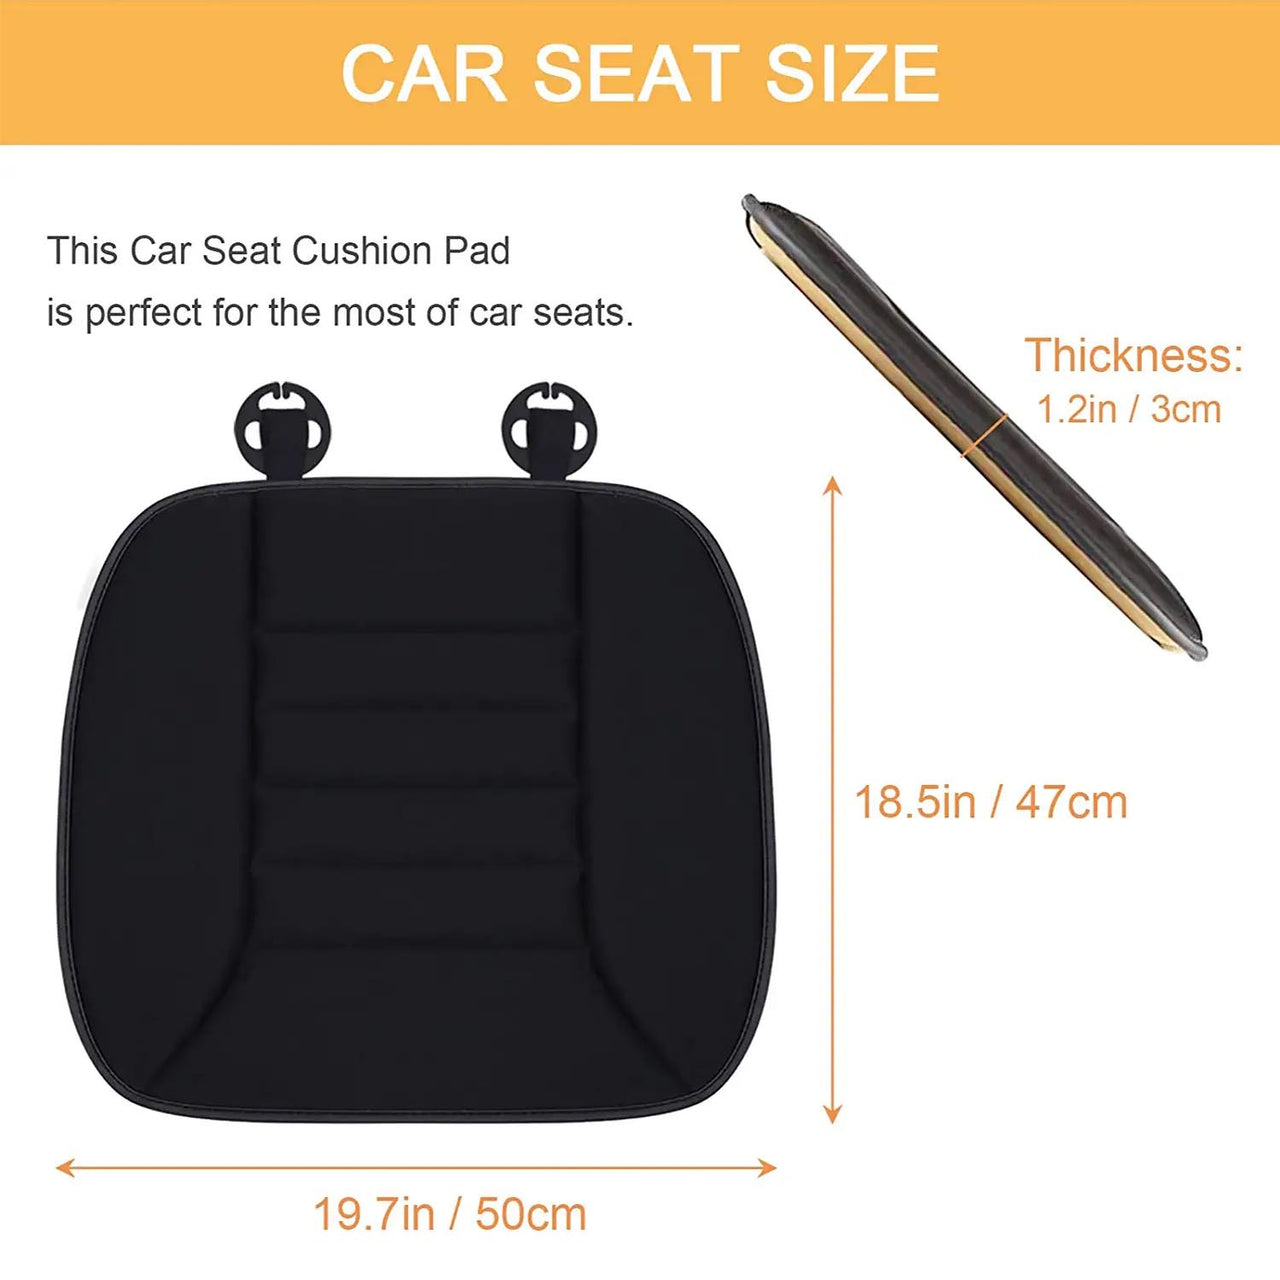 Car Seat Cushion with 1.2inch Comfort Memory Foam, Custom Logo For Your Cars, Seat Cushion for Car and Office Chair FJ19989